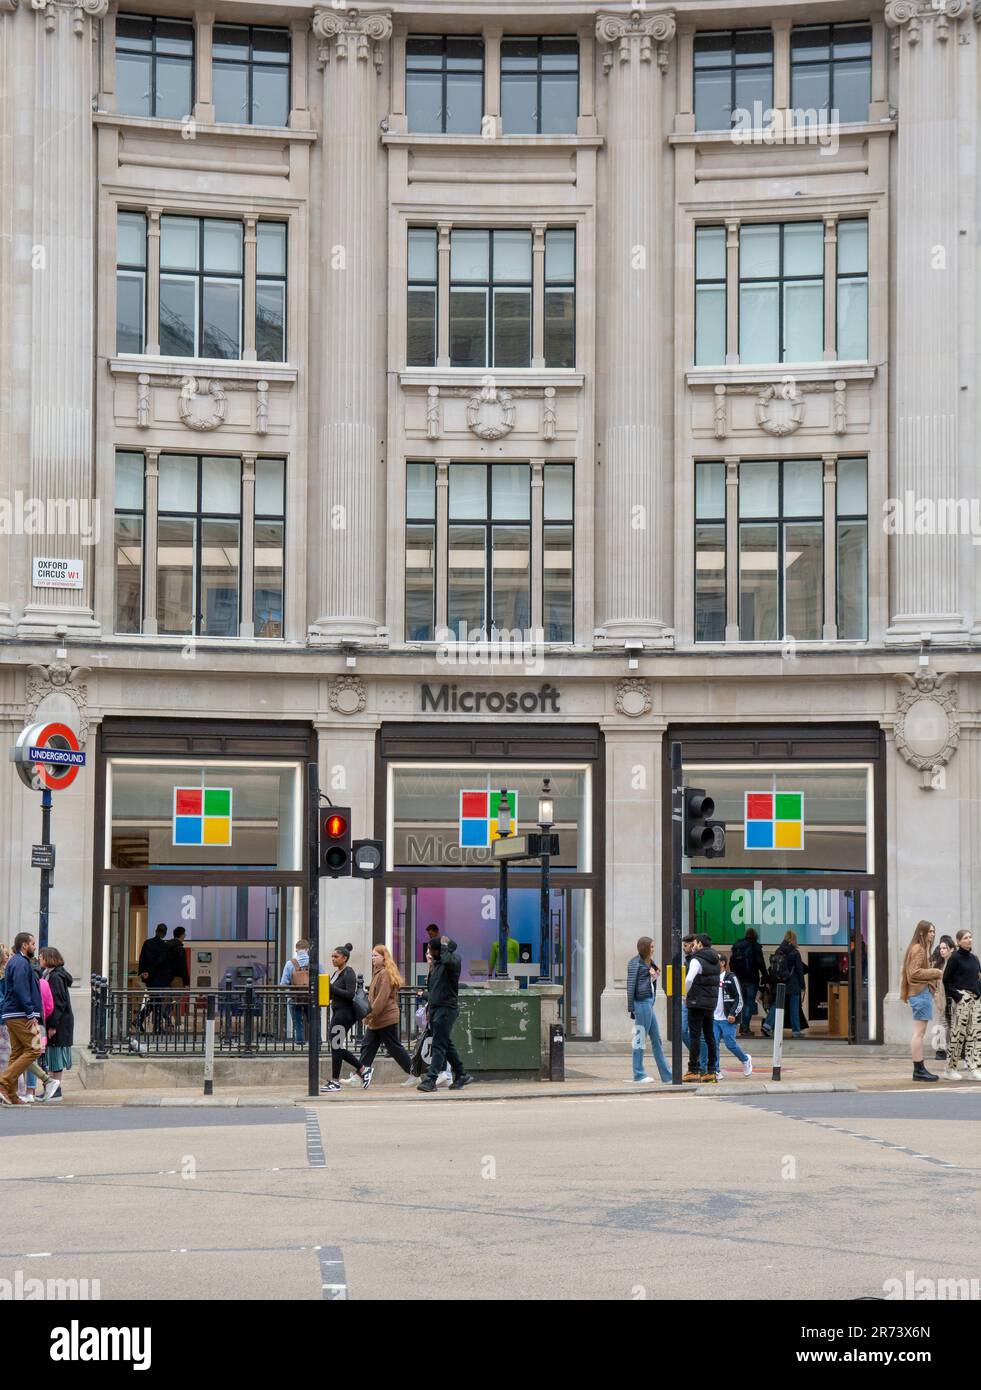 London, UK - May, 8, 2023 : Microsoft store in the London city. Microsoft Corporation is an American multinational technology corporation headquartere Stock Photo